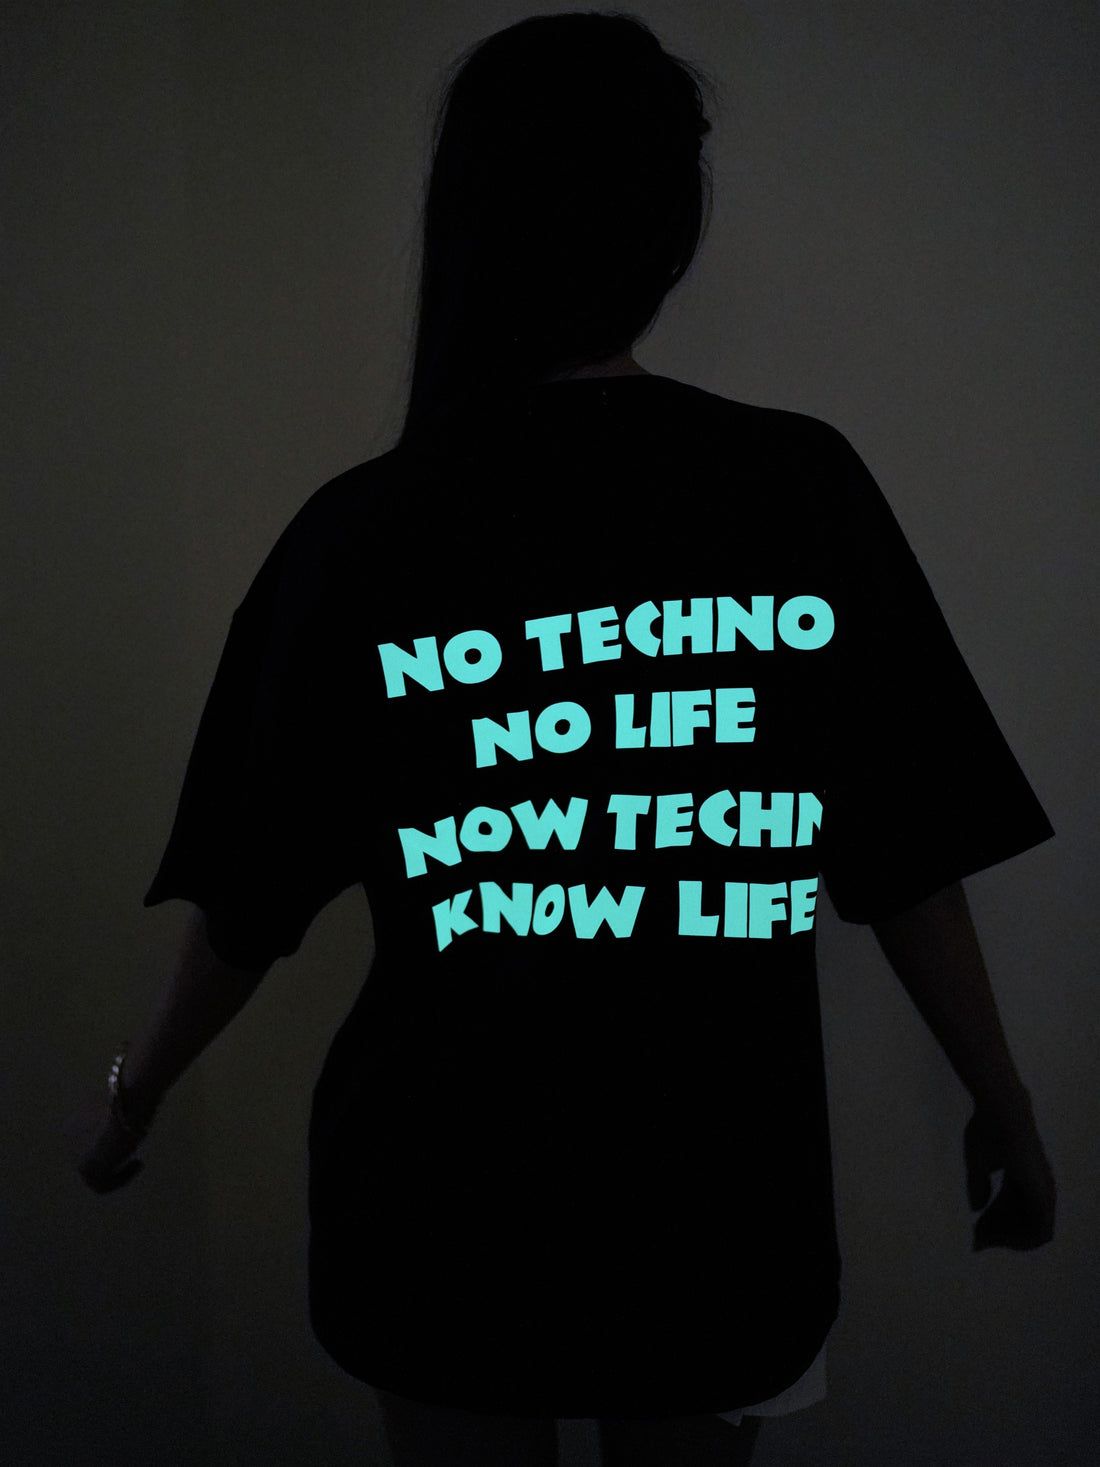 Know Techno Know Life - Glow In Dark Drop sleeved Tee (Blue Glow) For Men and Women